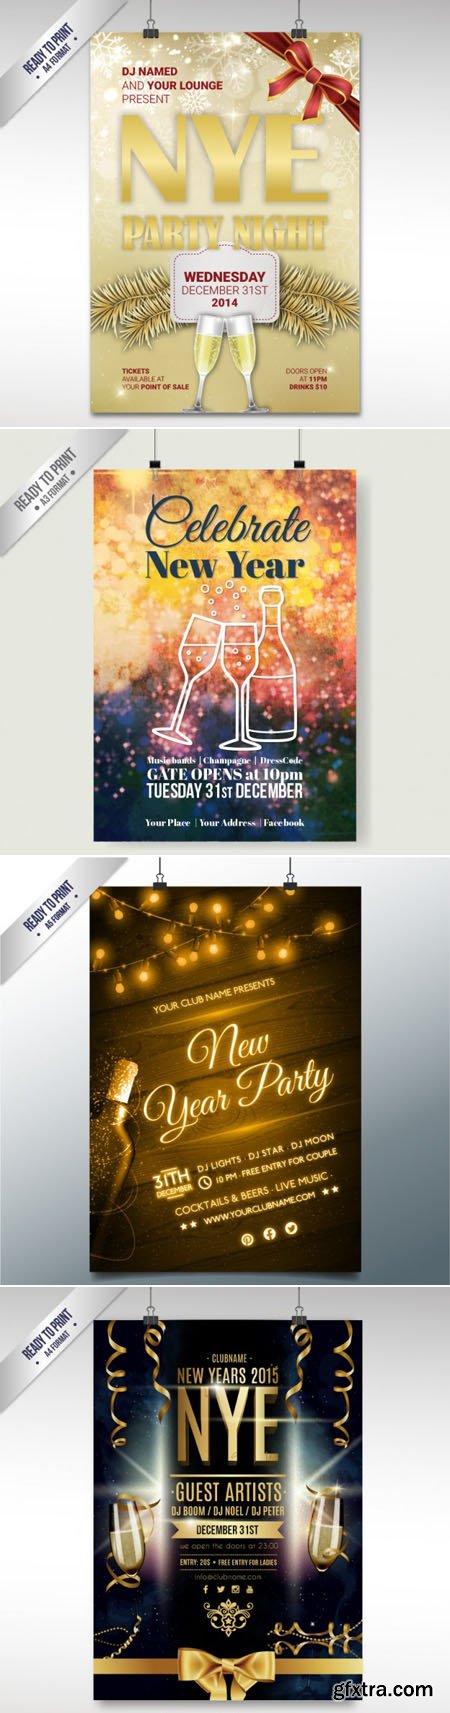 CMYK New Year 2016 Celebration Posters Vector Templates